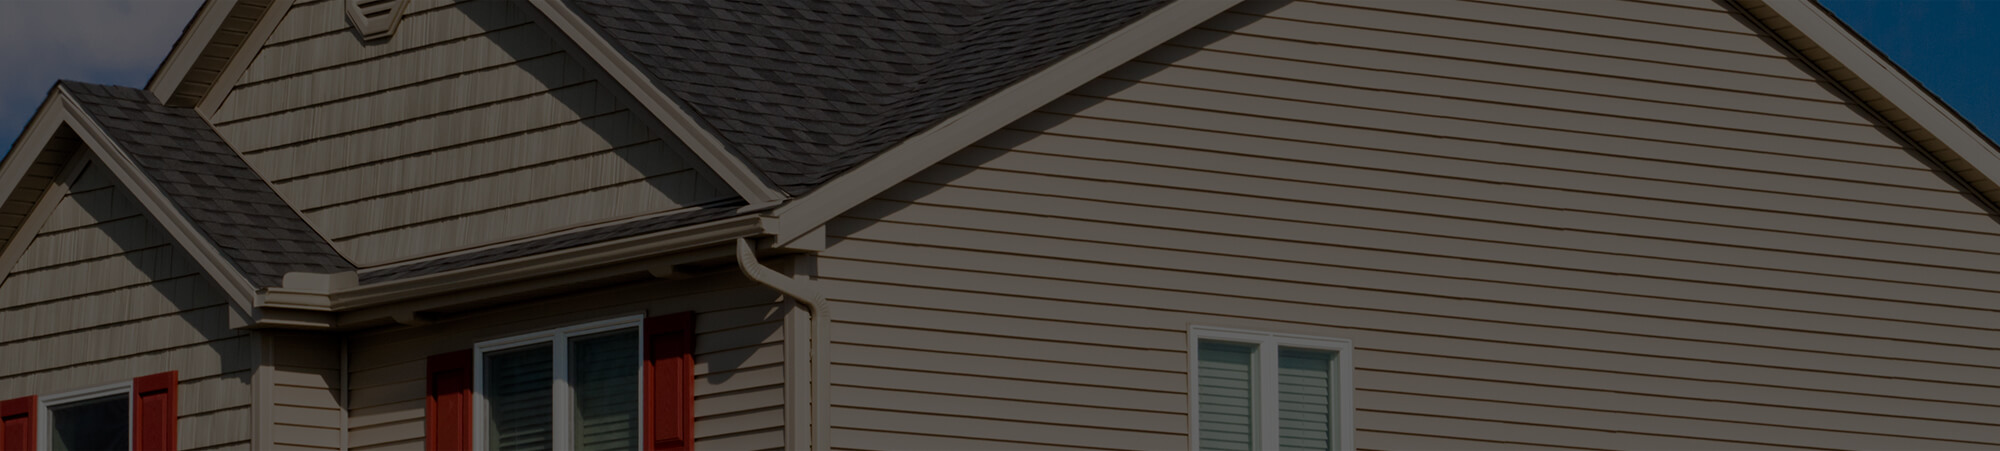 siding installation and replacement services in manitowoc wi